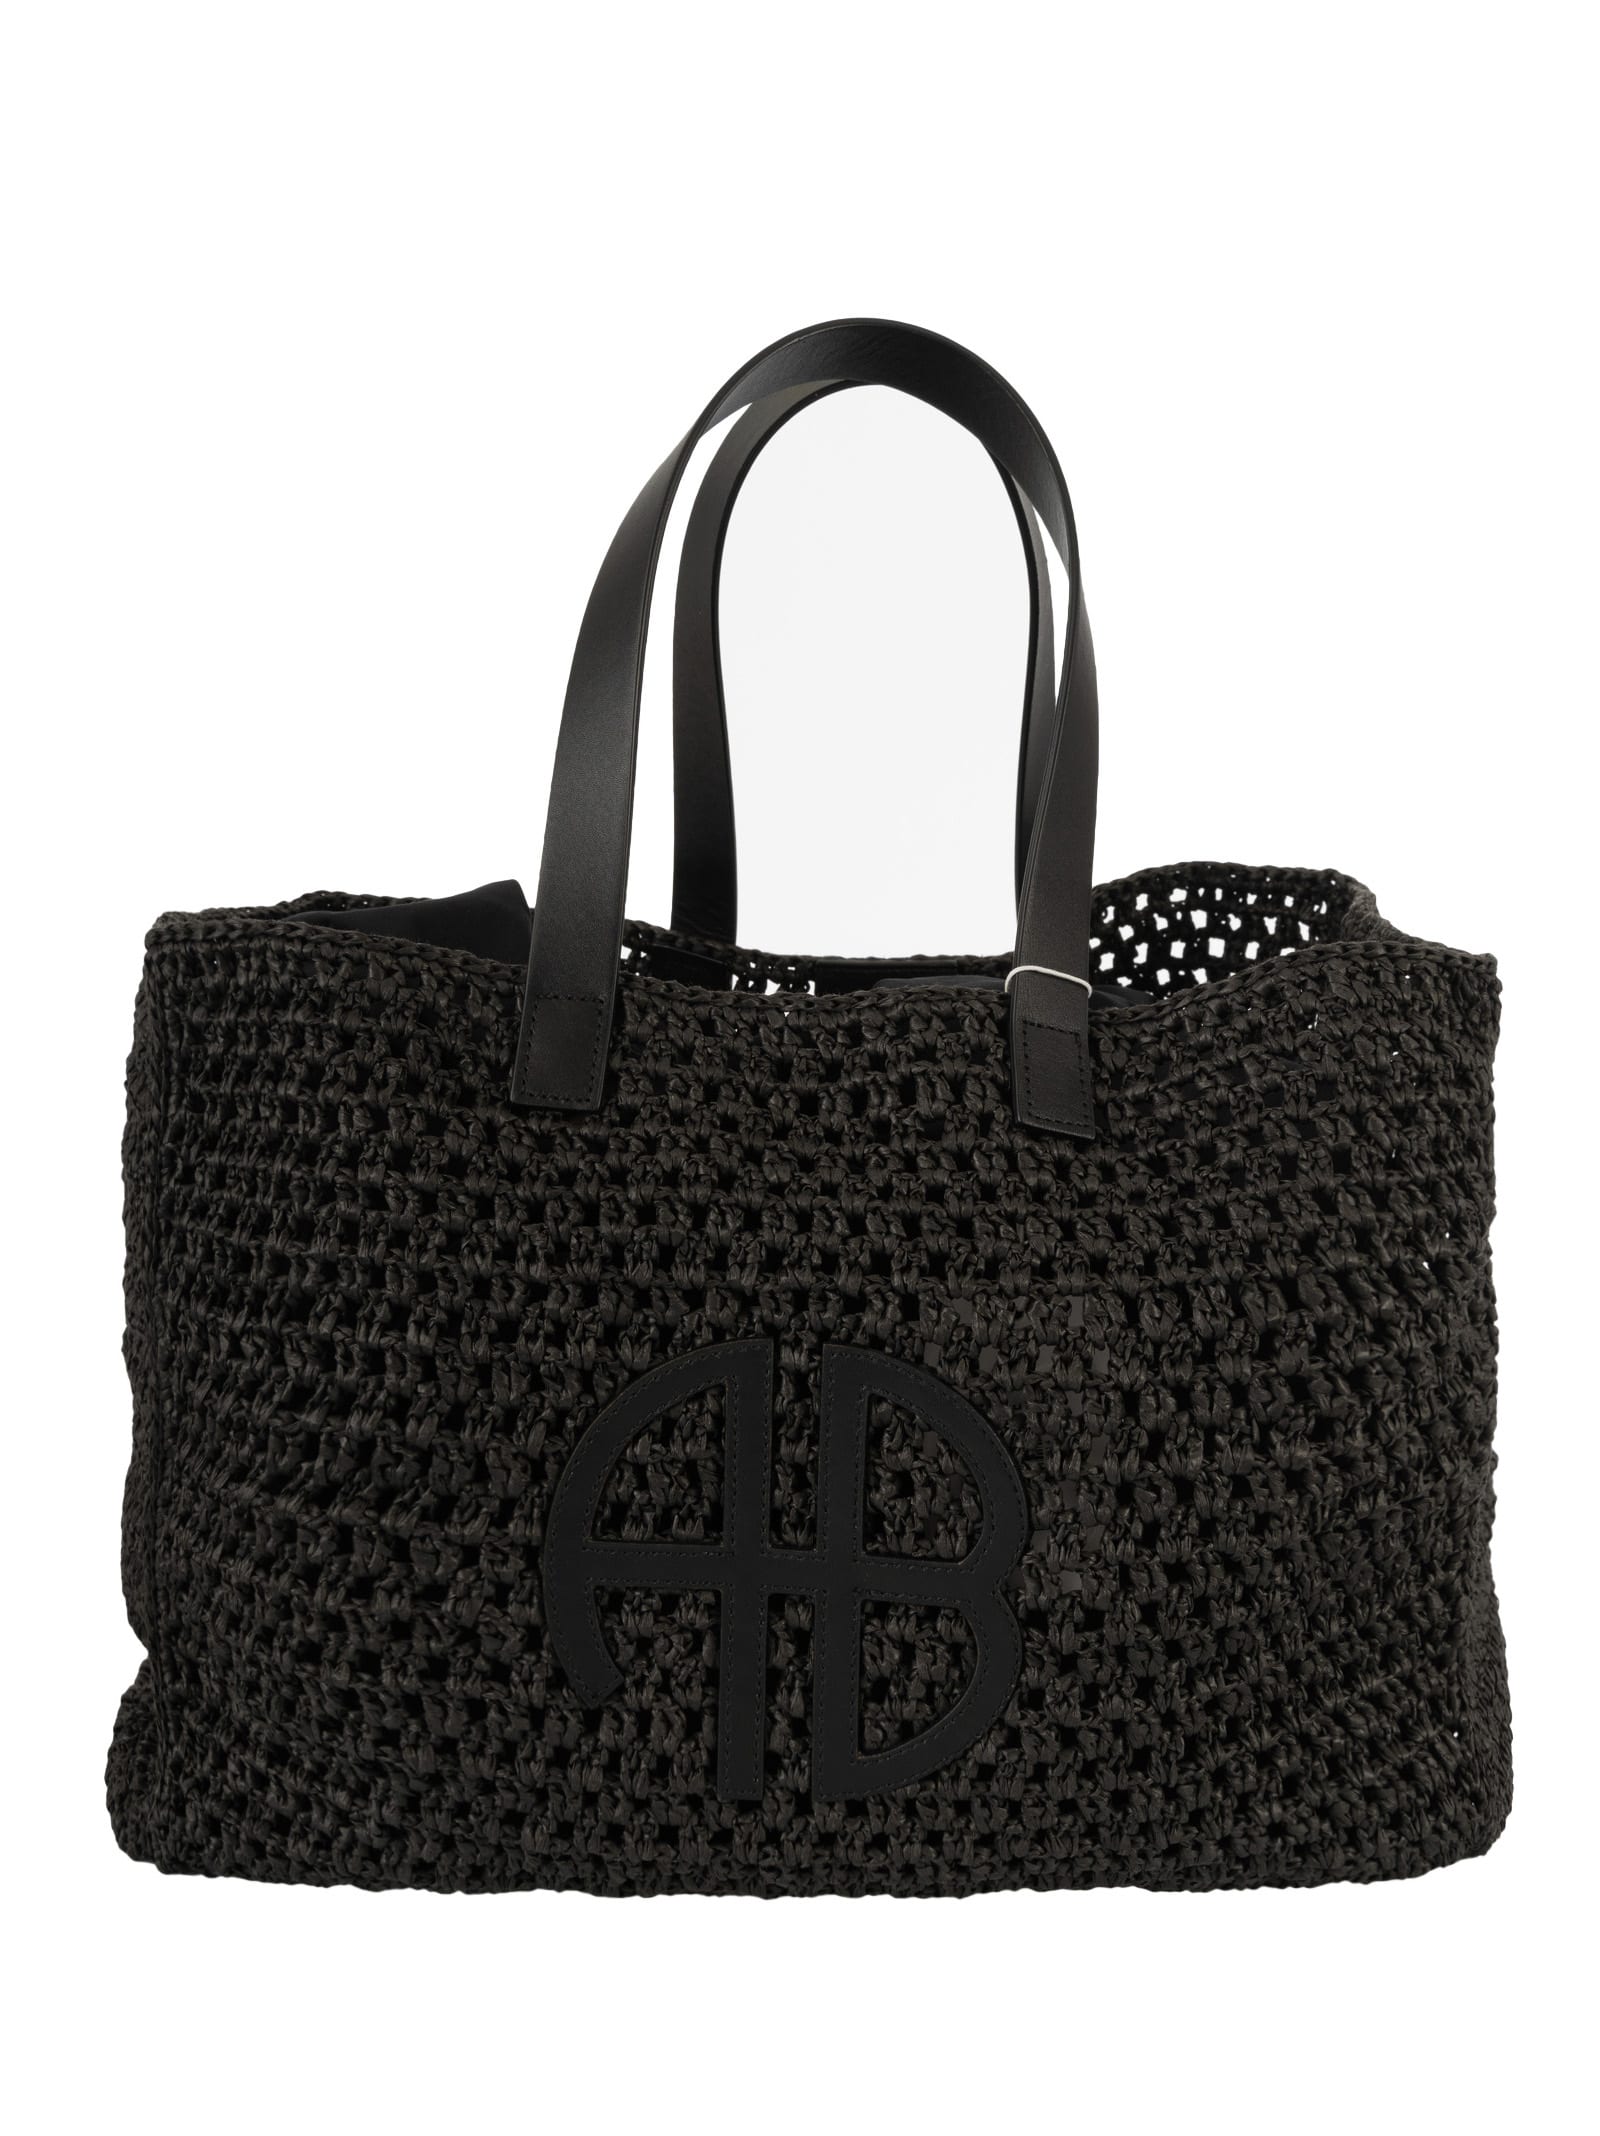 Anine Bing Large Rio Tote - ShopStyle